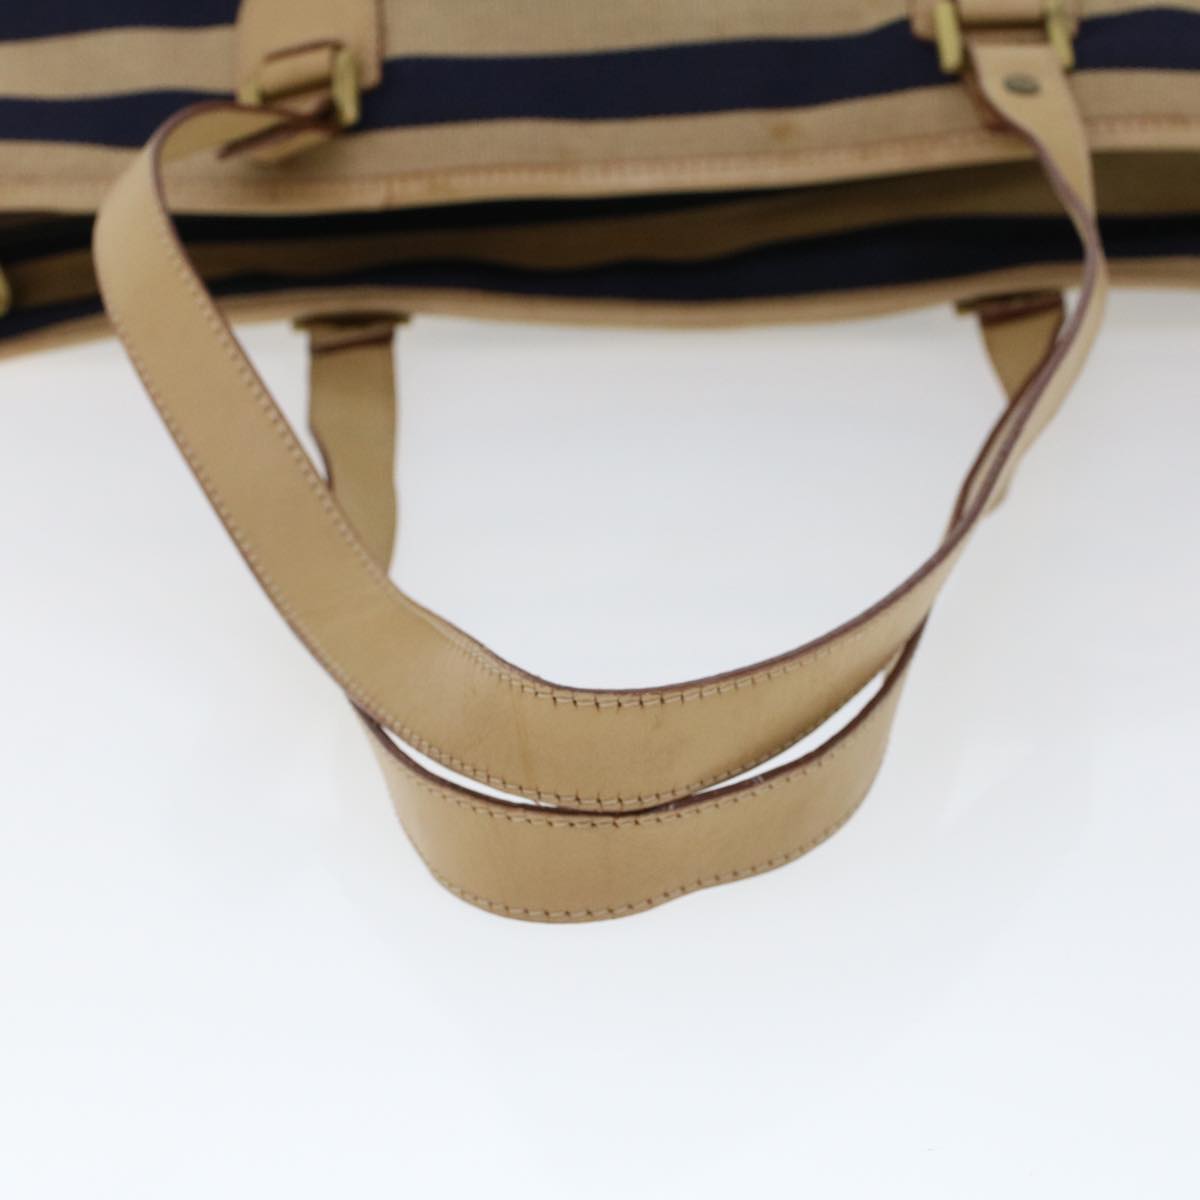 BALLY Tote Bag Canvas Beige Auth bs5502